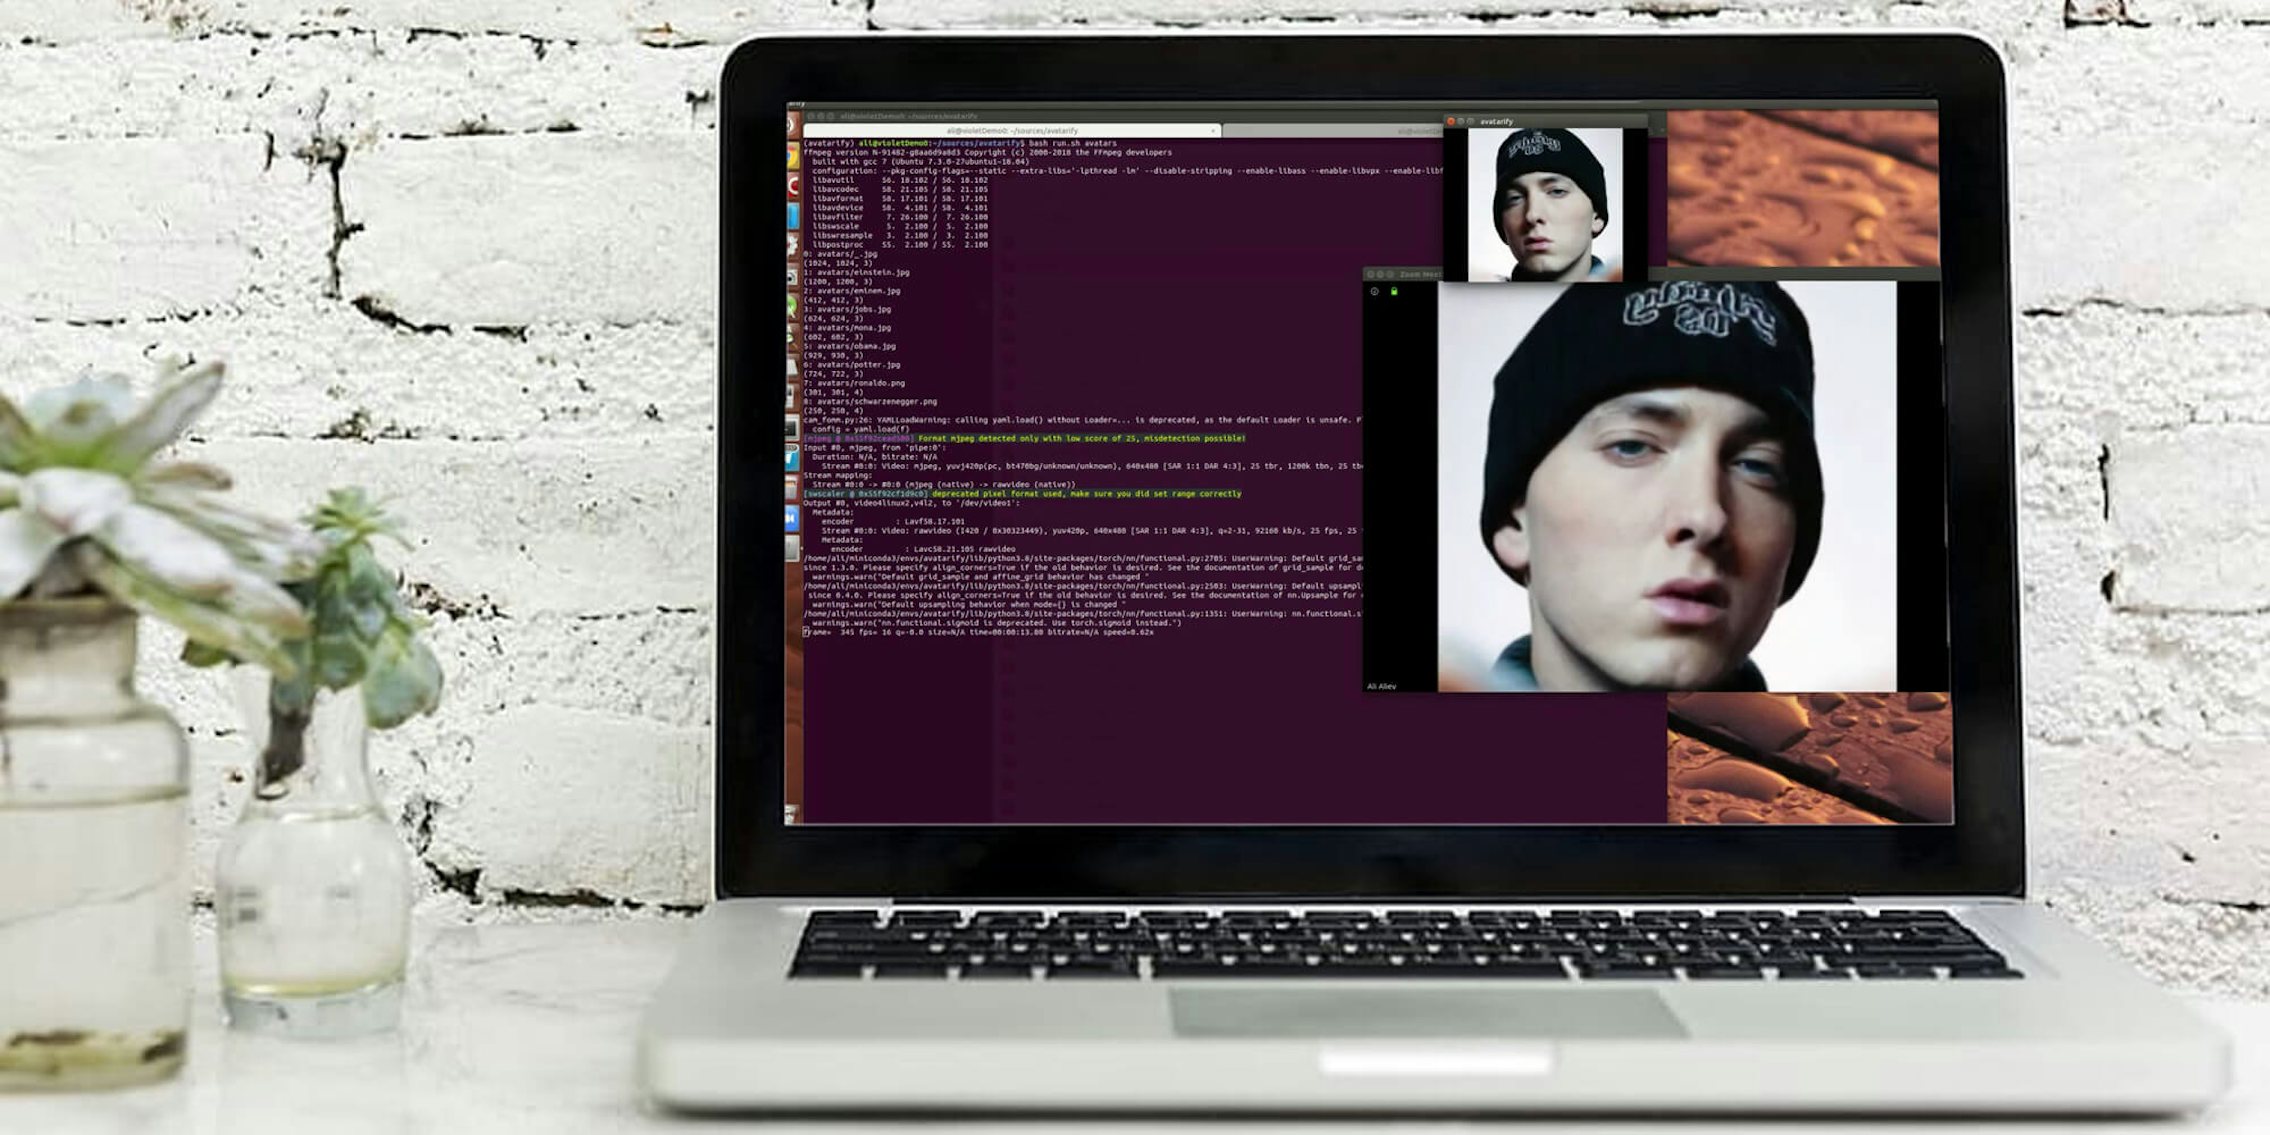 A Macbook with Eminem on the screen